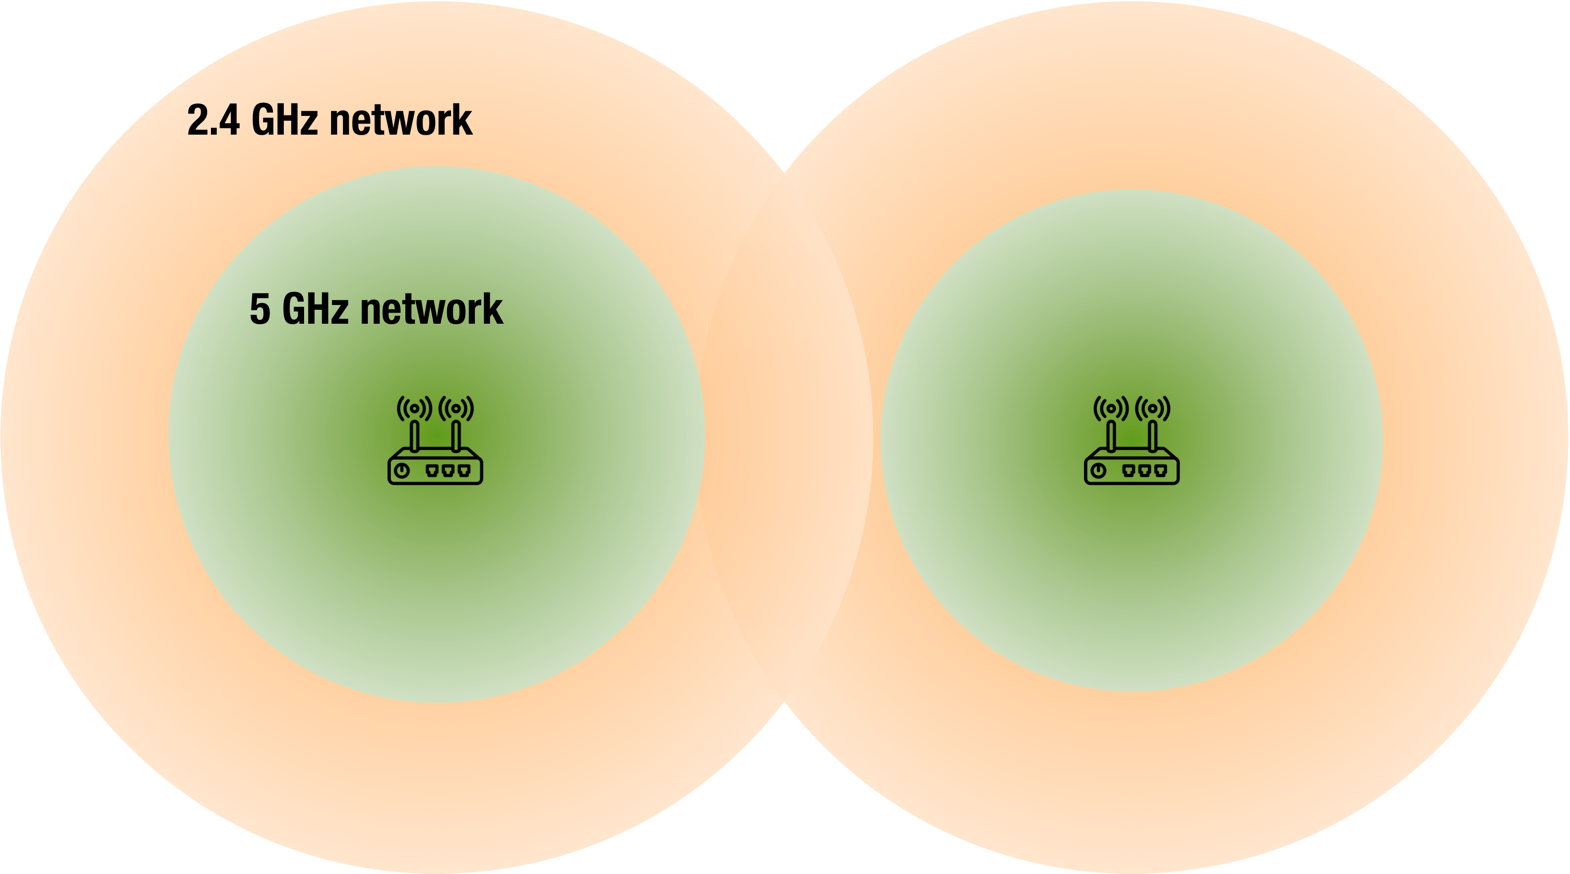 Figure 7: 2.4 GHz networks have greater coverage areas, but 5 GHz networks provide higher throughput.